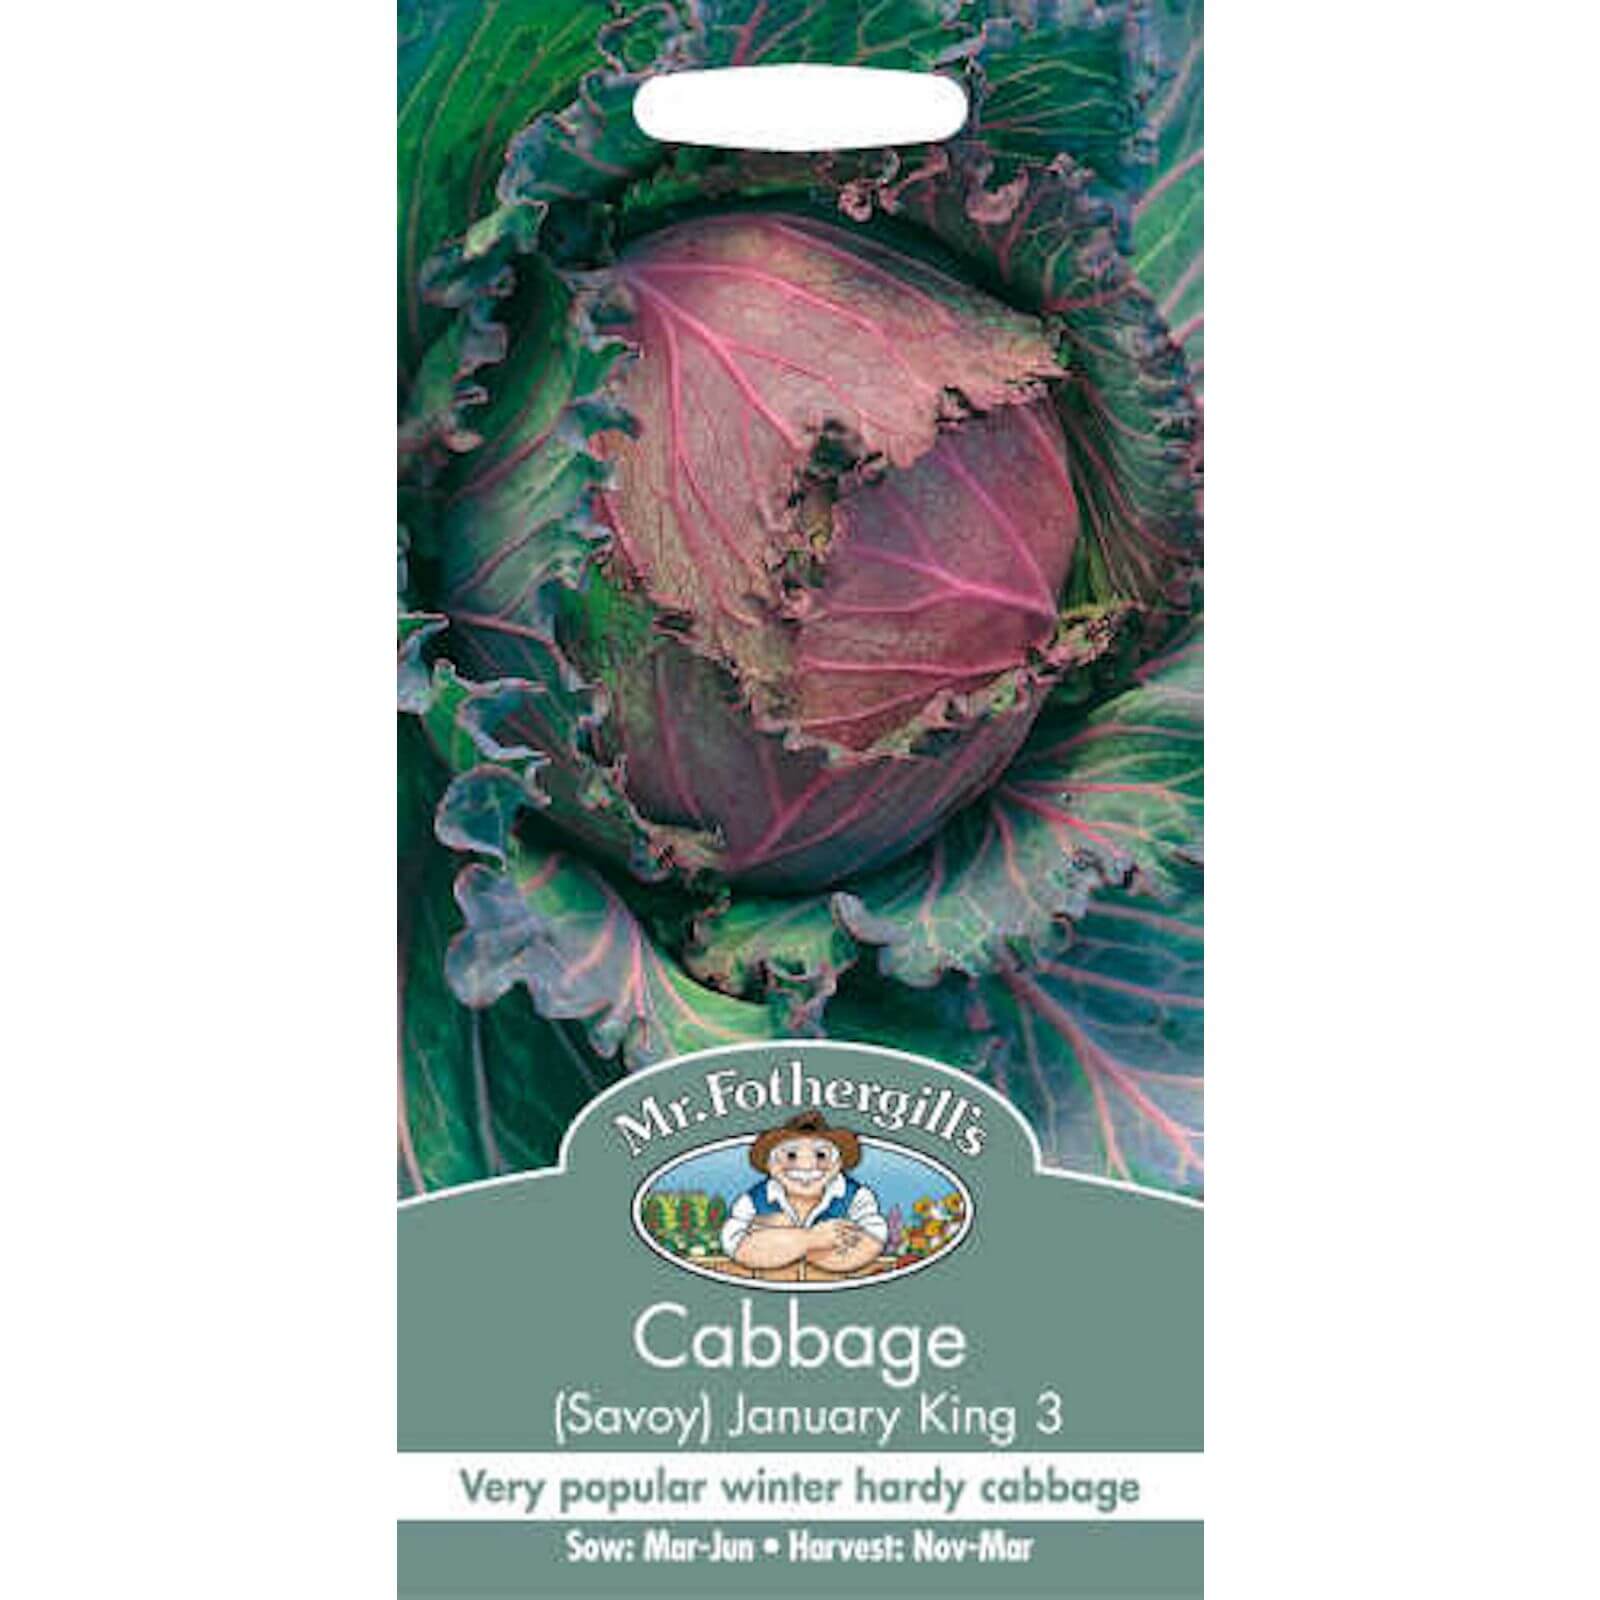 Mr. Fothergill's Cabbage Savoy January King 3 Seeds